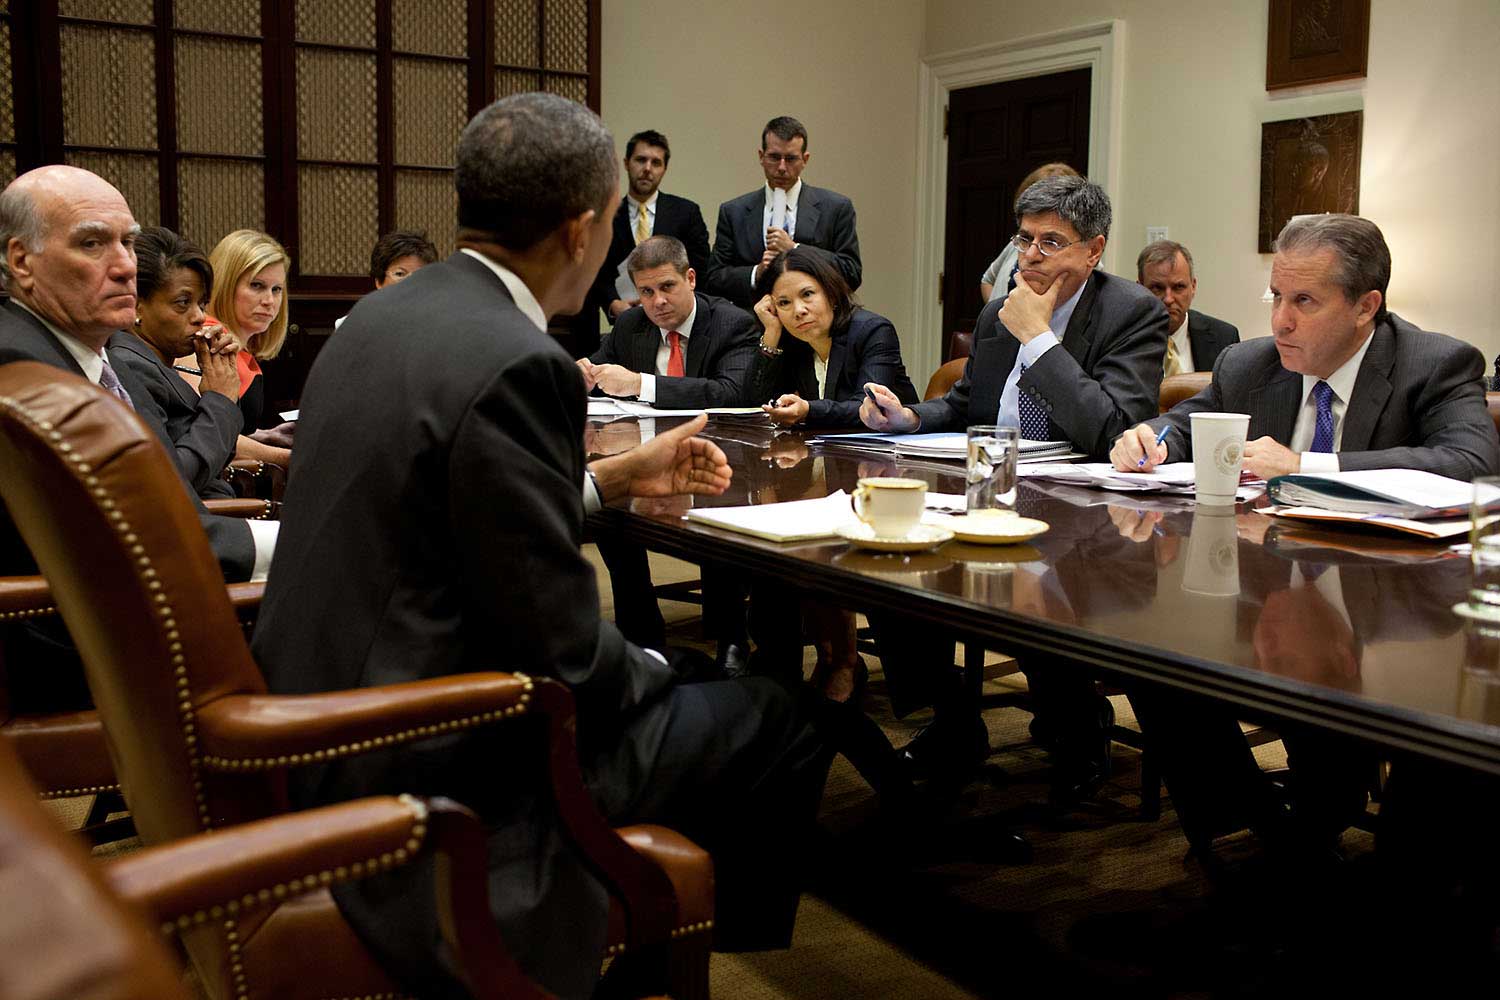 White House aides listen as President Obama makes a point during a meeting in the Roosevelt Room of the White House, Sept. 7, 2011.